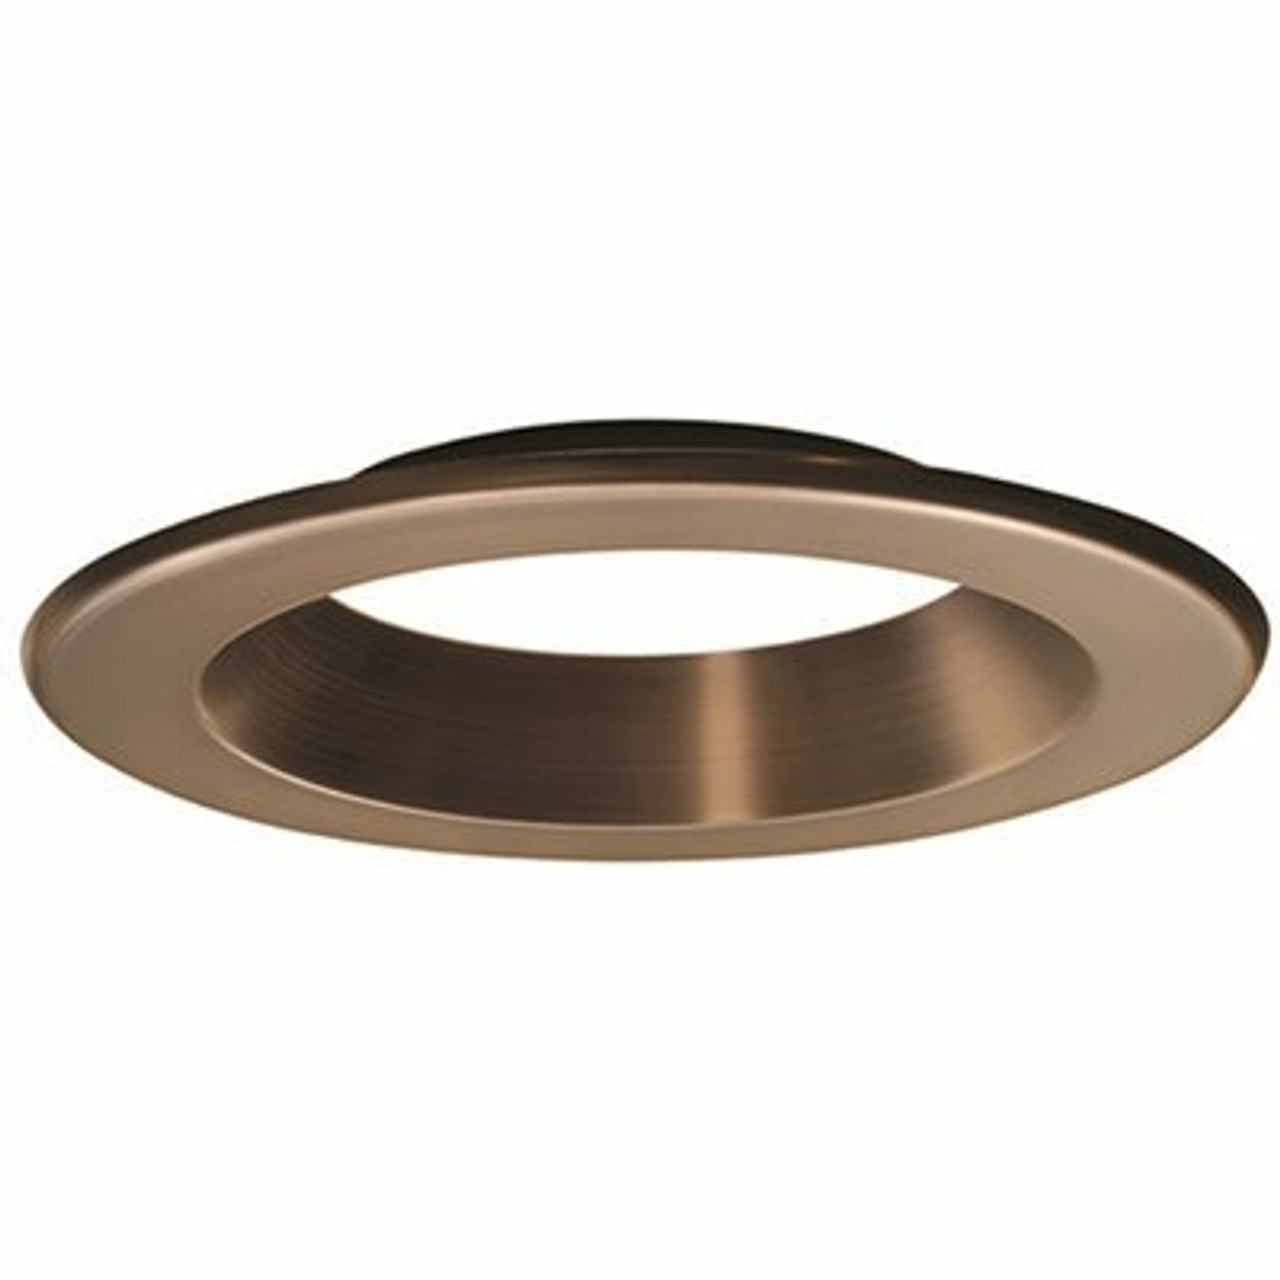 Envirolite 6 In. Decorative Bronze Trim Ring For Led Recessed Light With Trim Ring